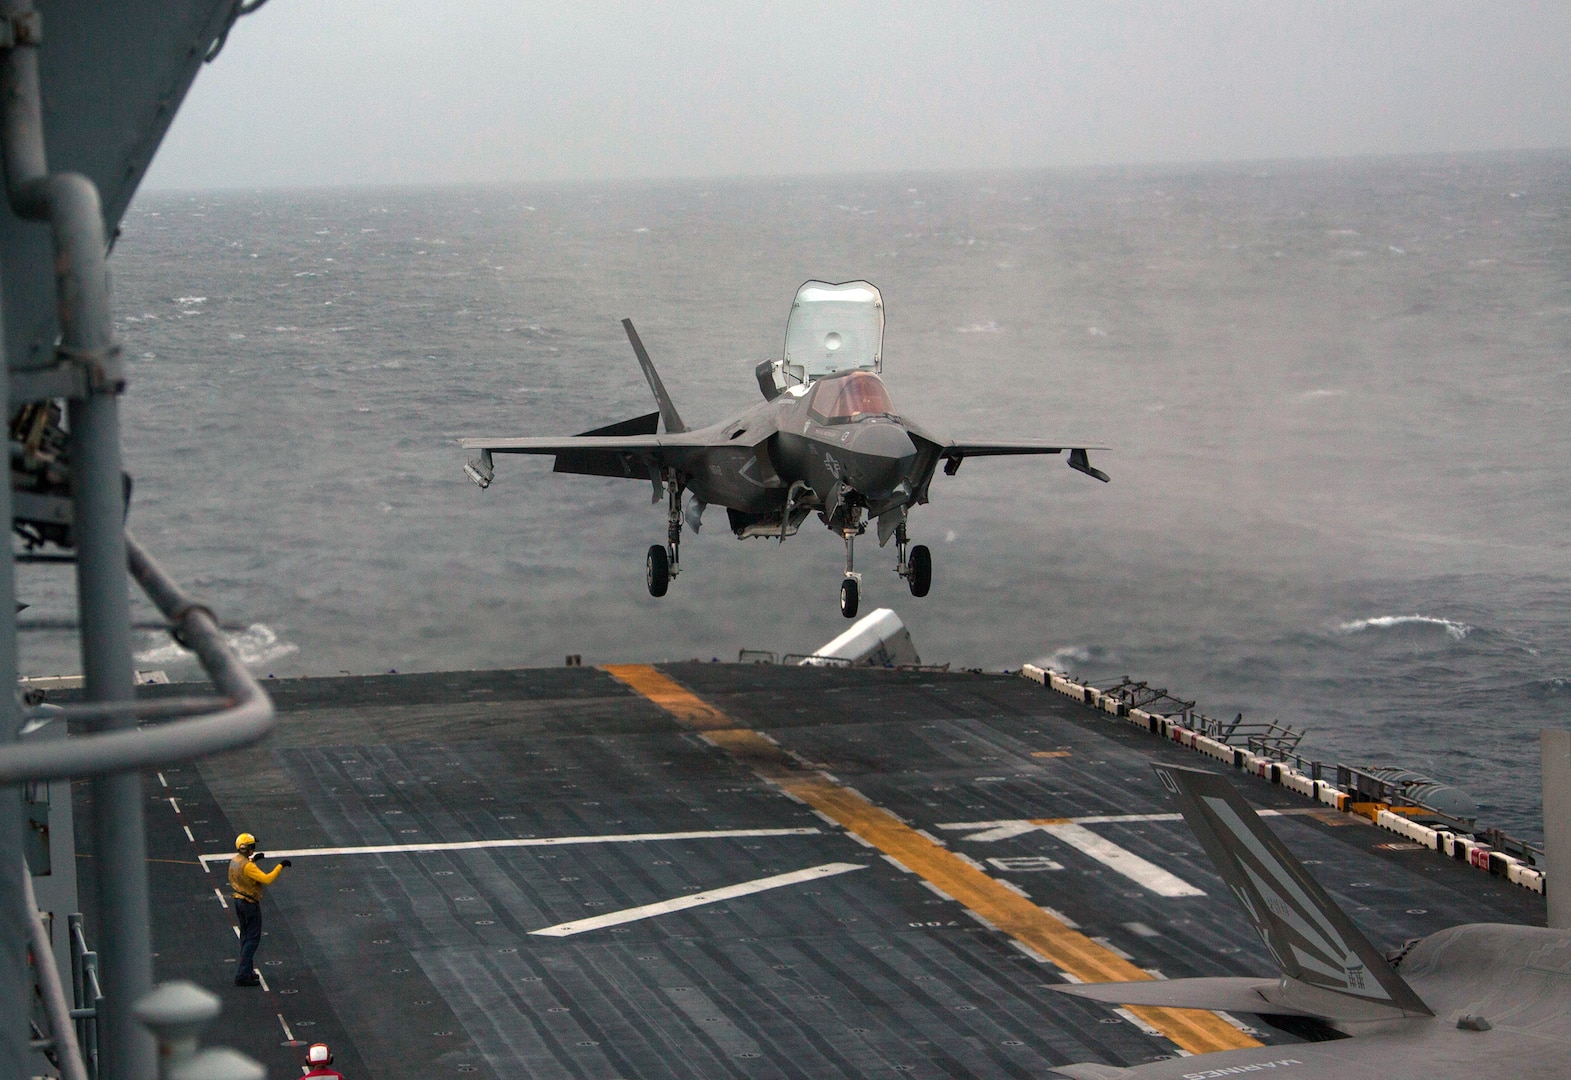 Marine F-35B Lightning II fighter aircraft complete GAU-22 cannon, ordnance hot reload exercise in Indo-Pacific Region